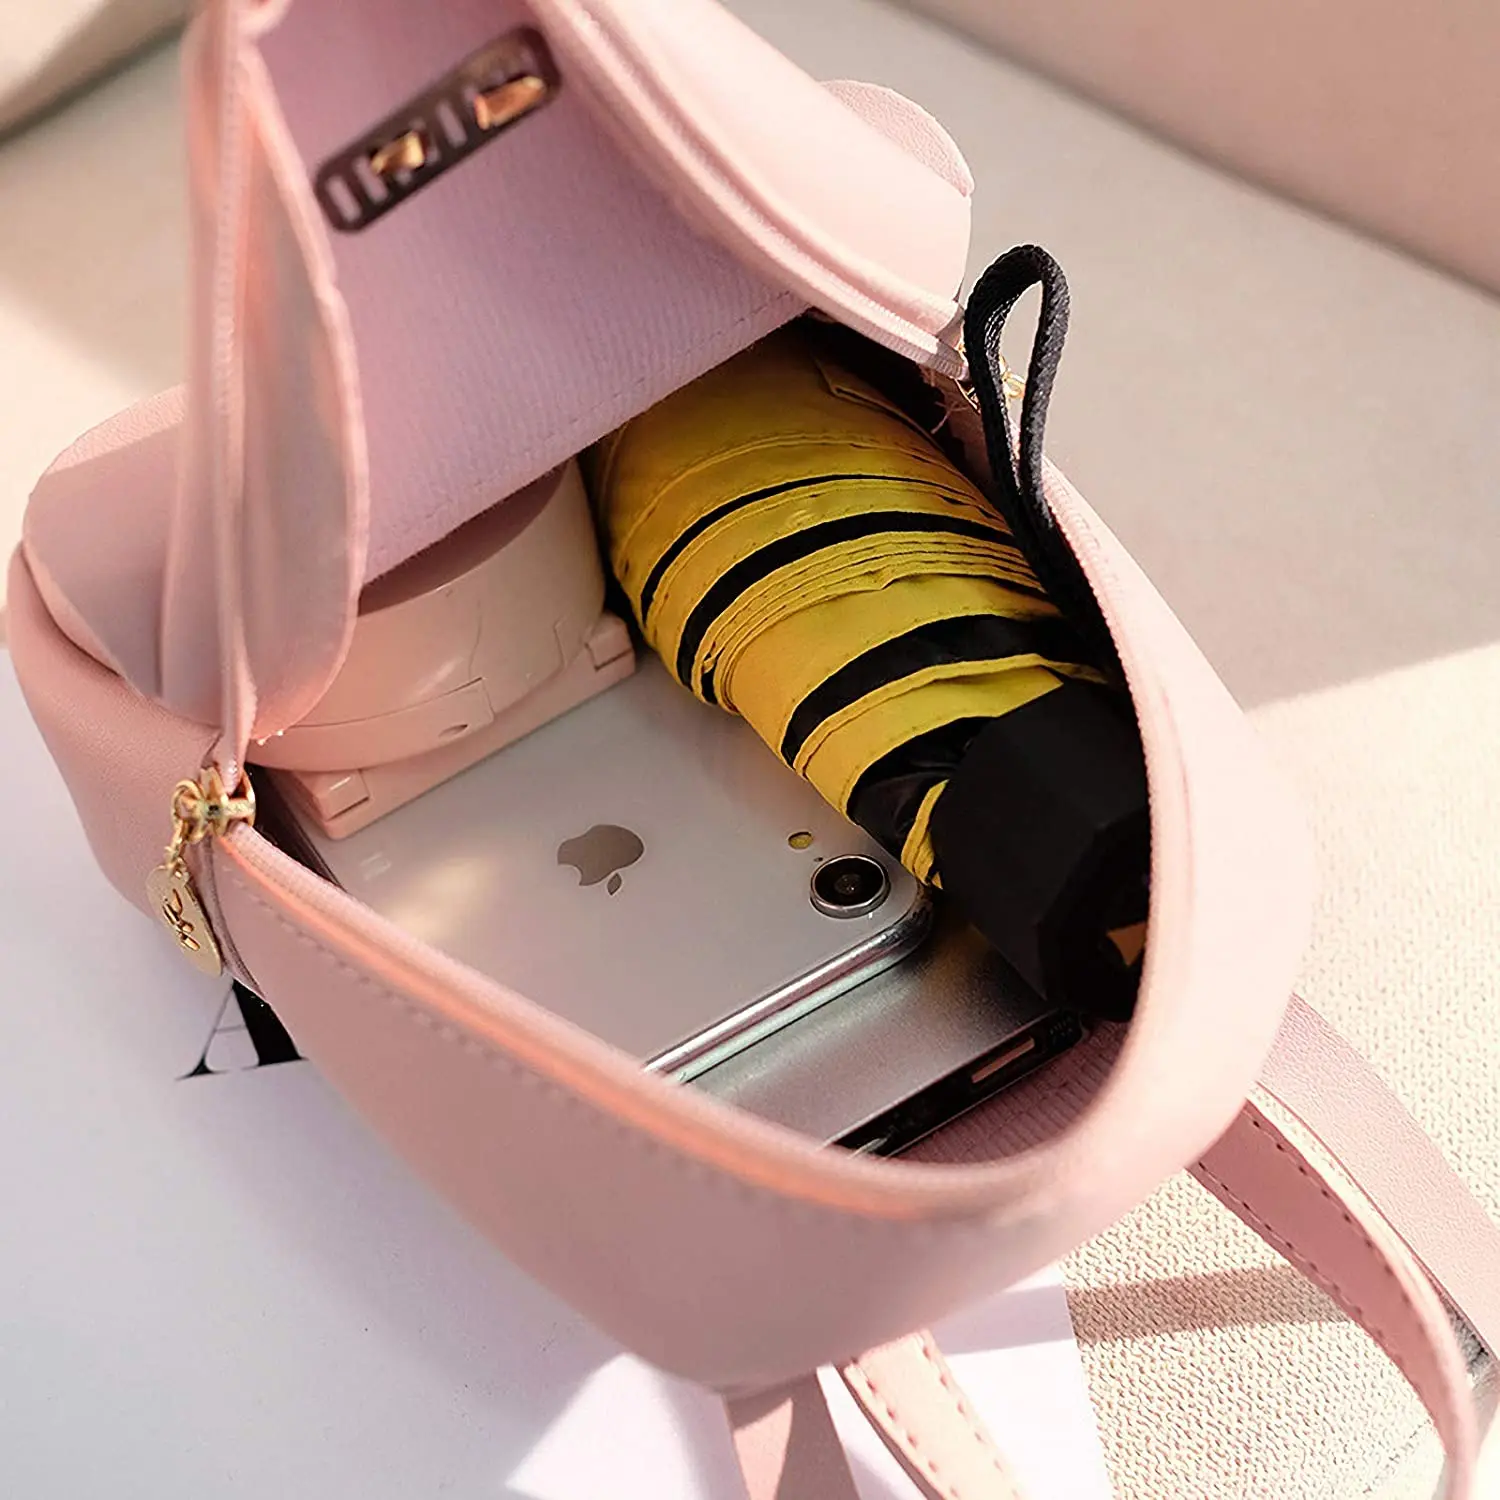 Wholesale Hot Sale Lightweight Shoulder Pouch Travel Cute Mini Shoulder Bag  Women Small Cell Phone Purse Backpack From m.